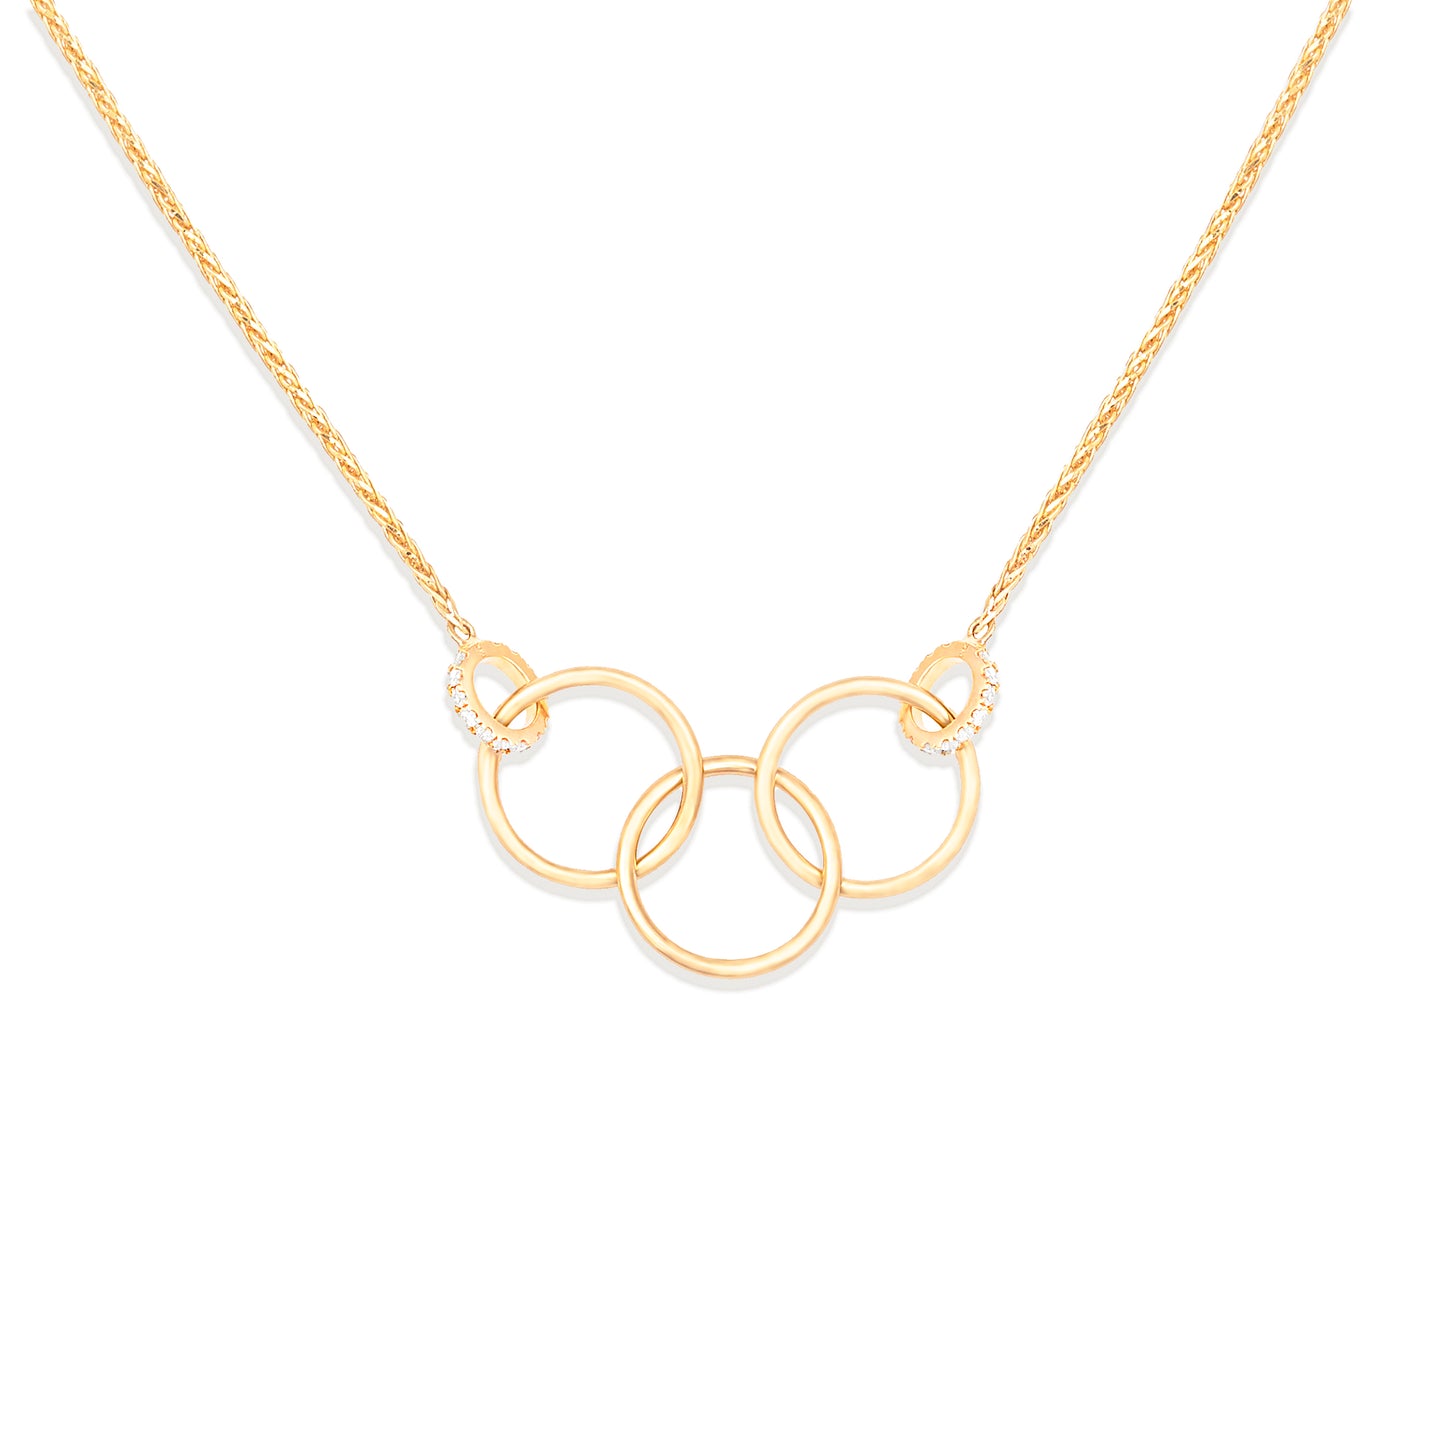 The Crew Triple Circle Necklace